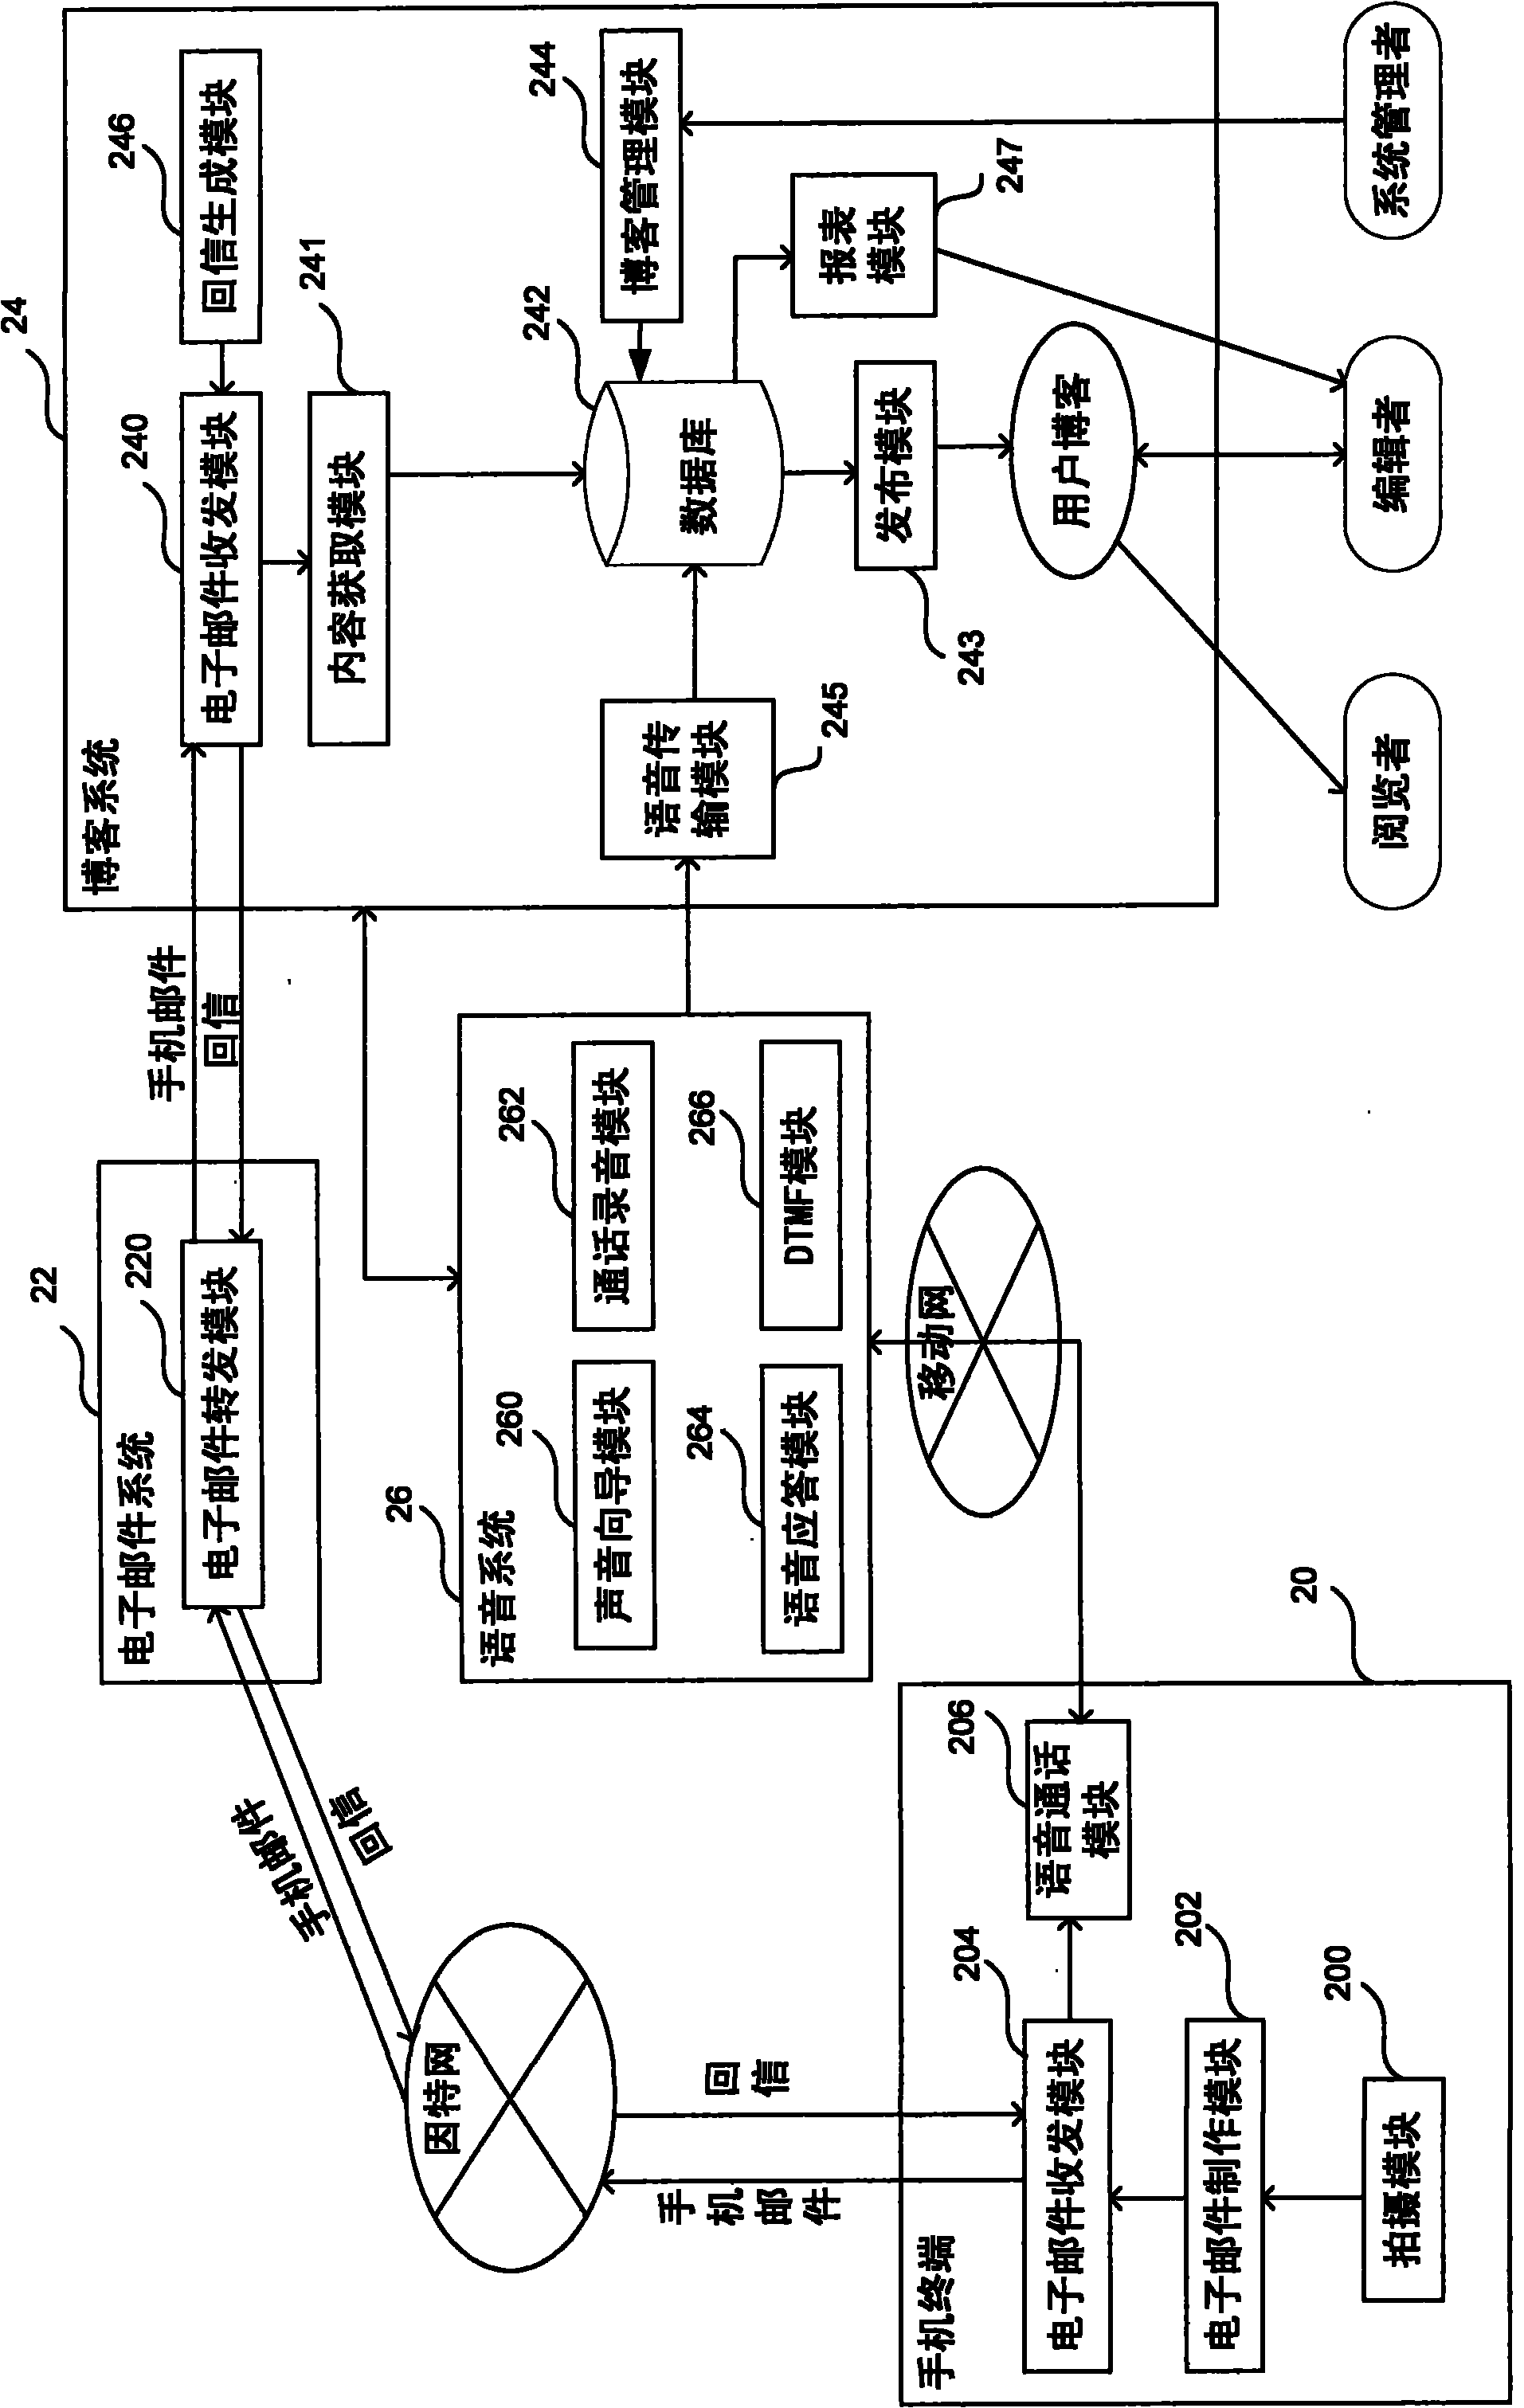 System and method for receiving mobile phone transmission data by blog